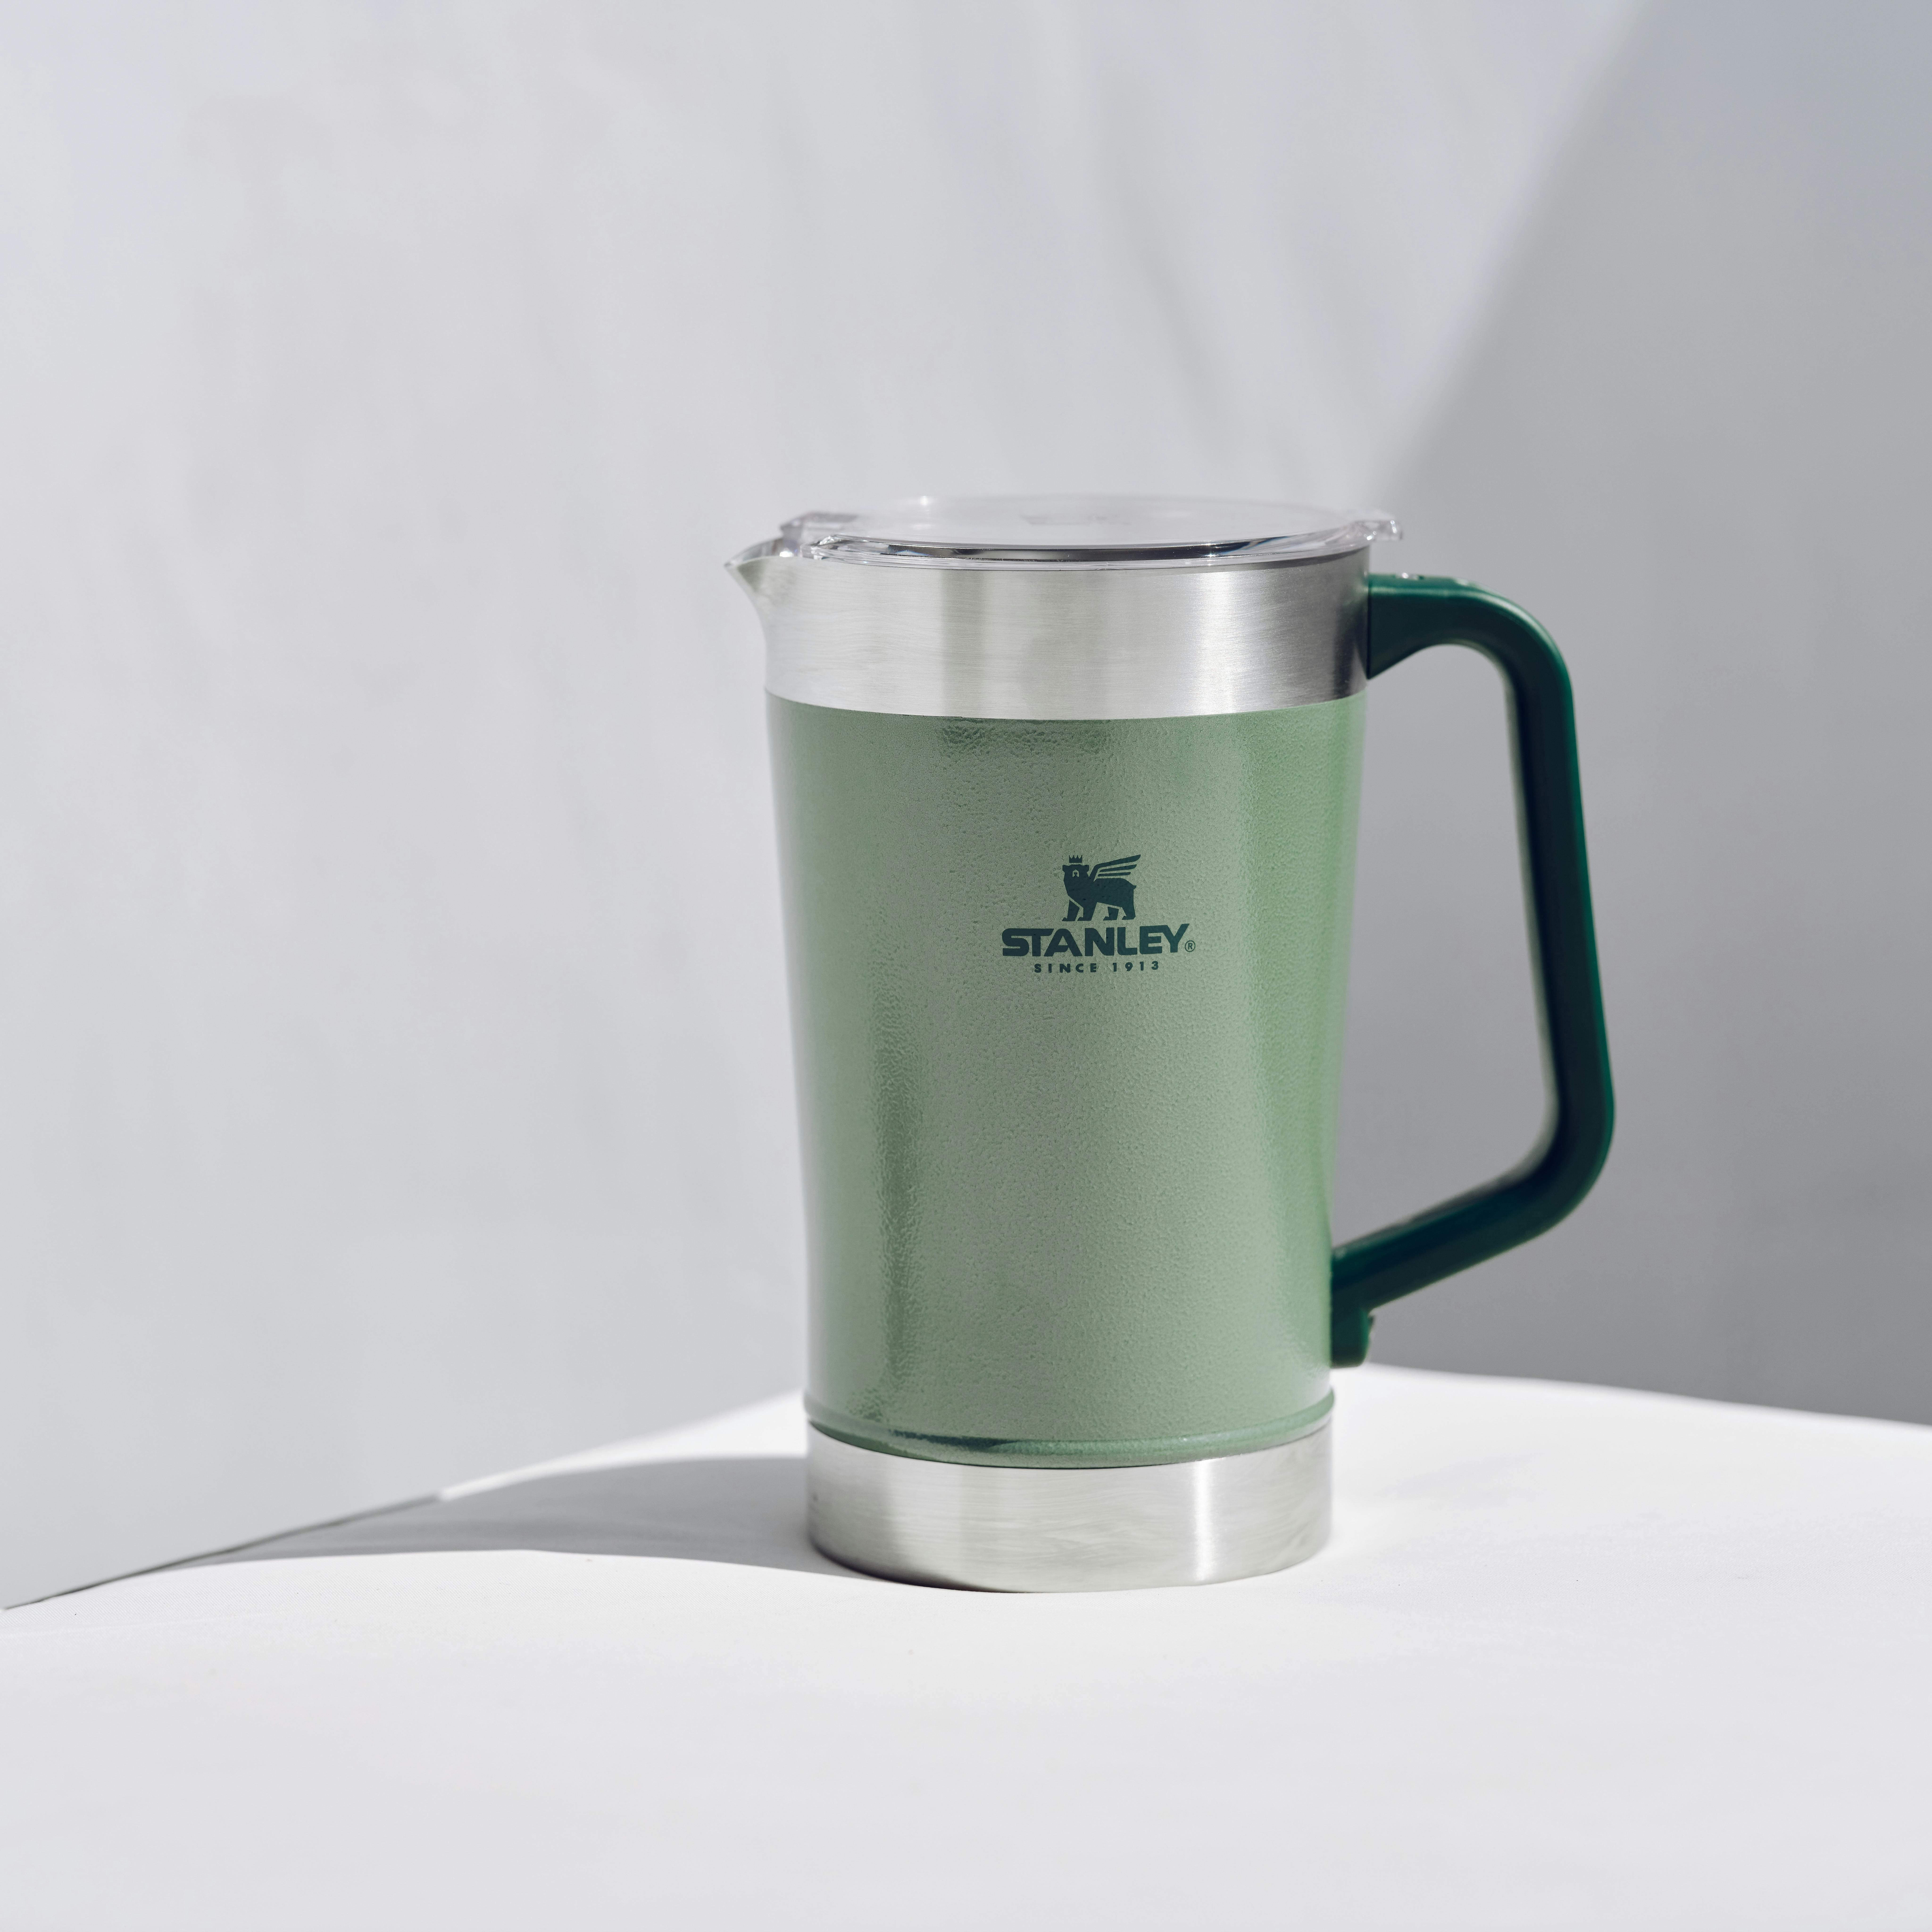 Stay-Chill Classic Pitcher Set